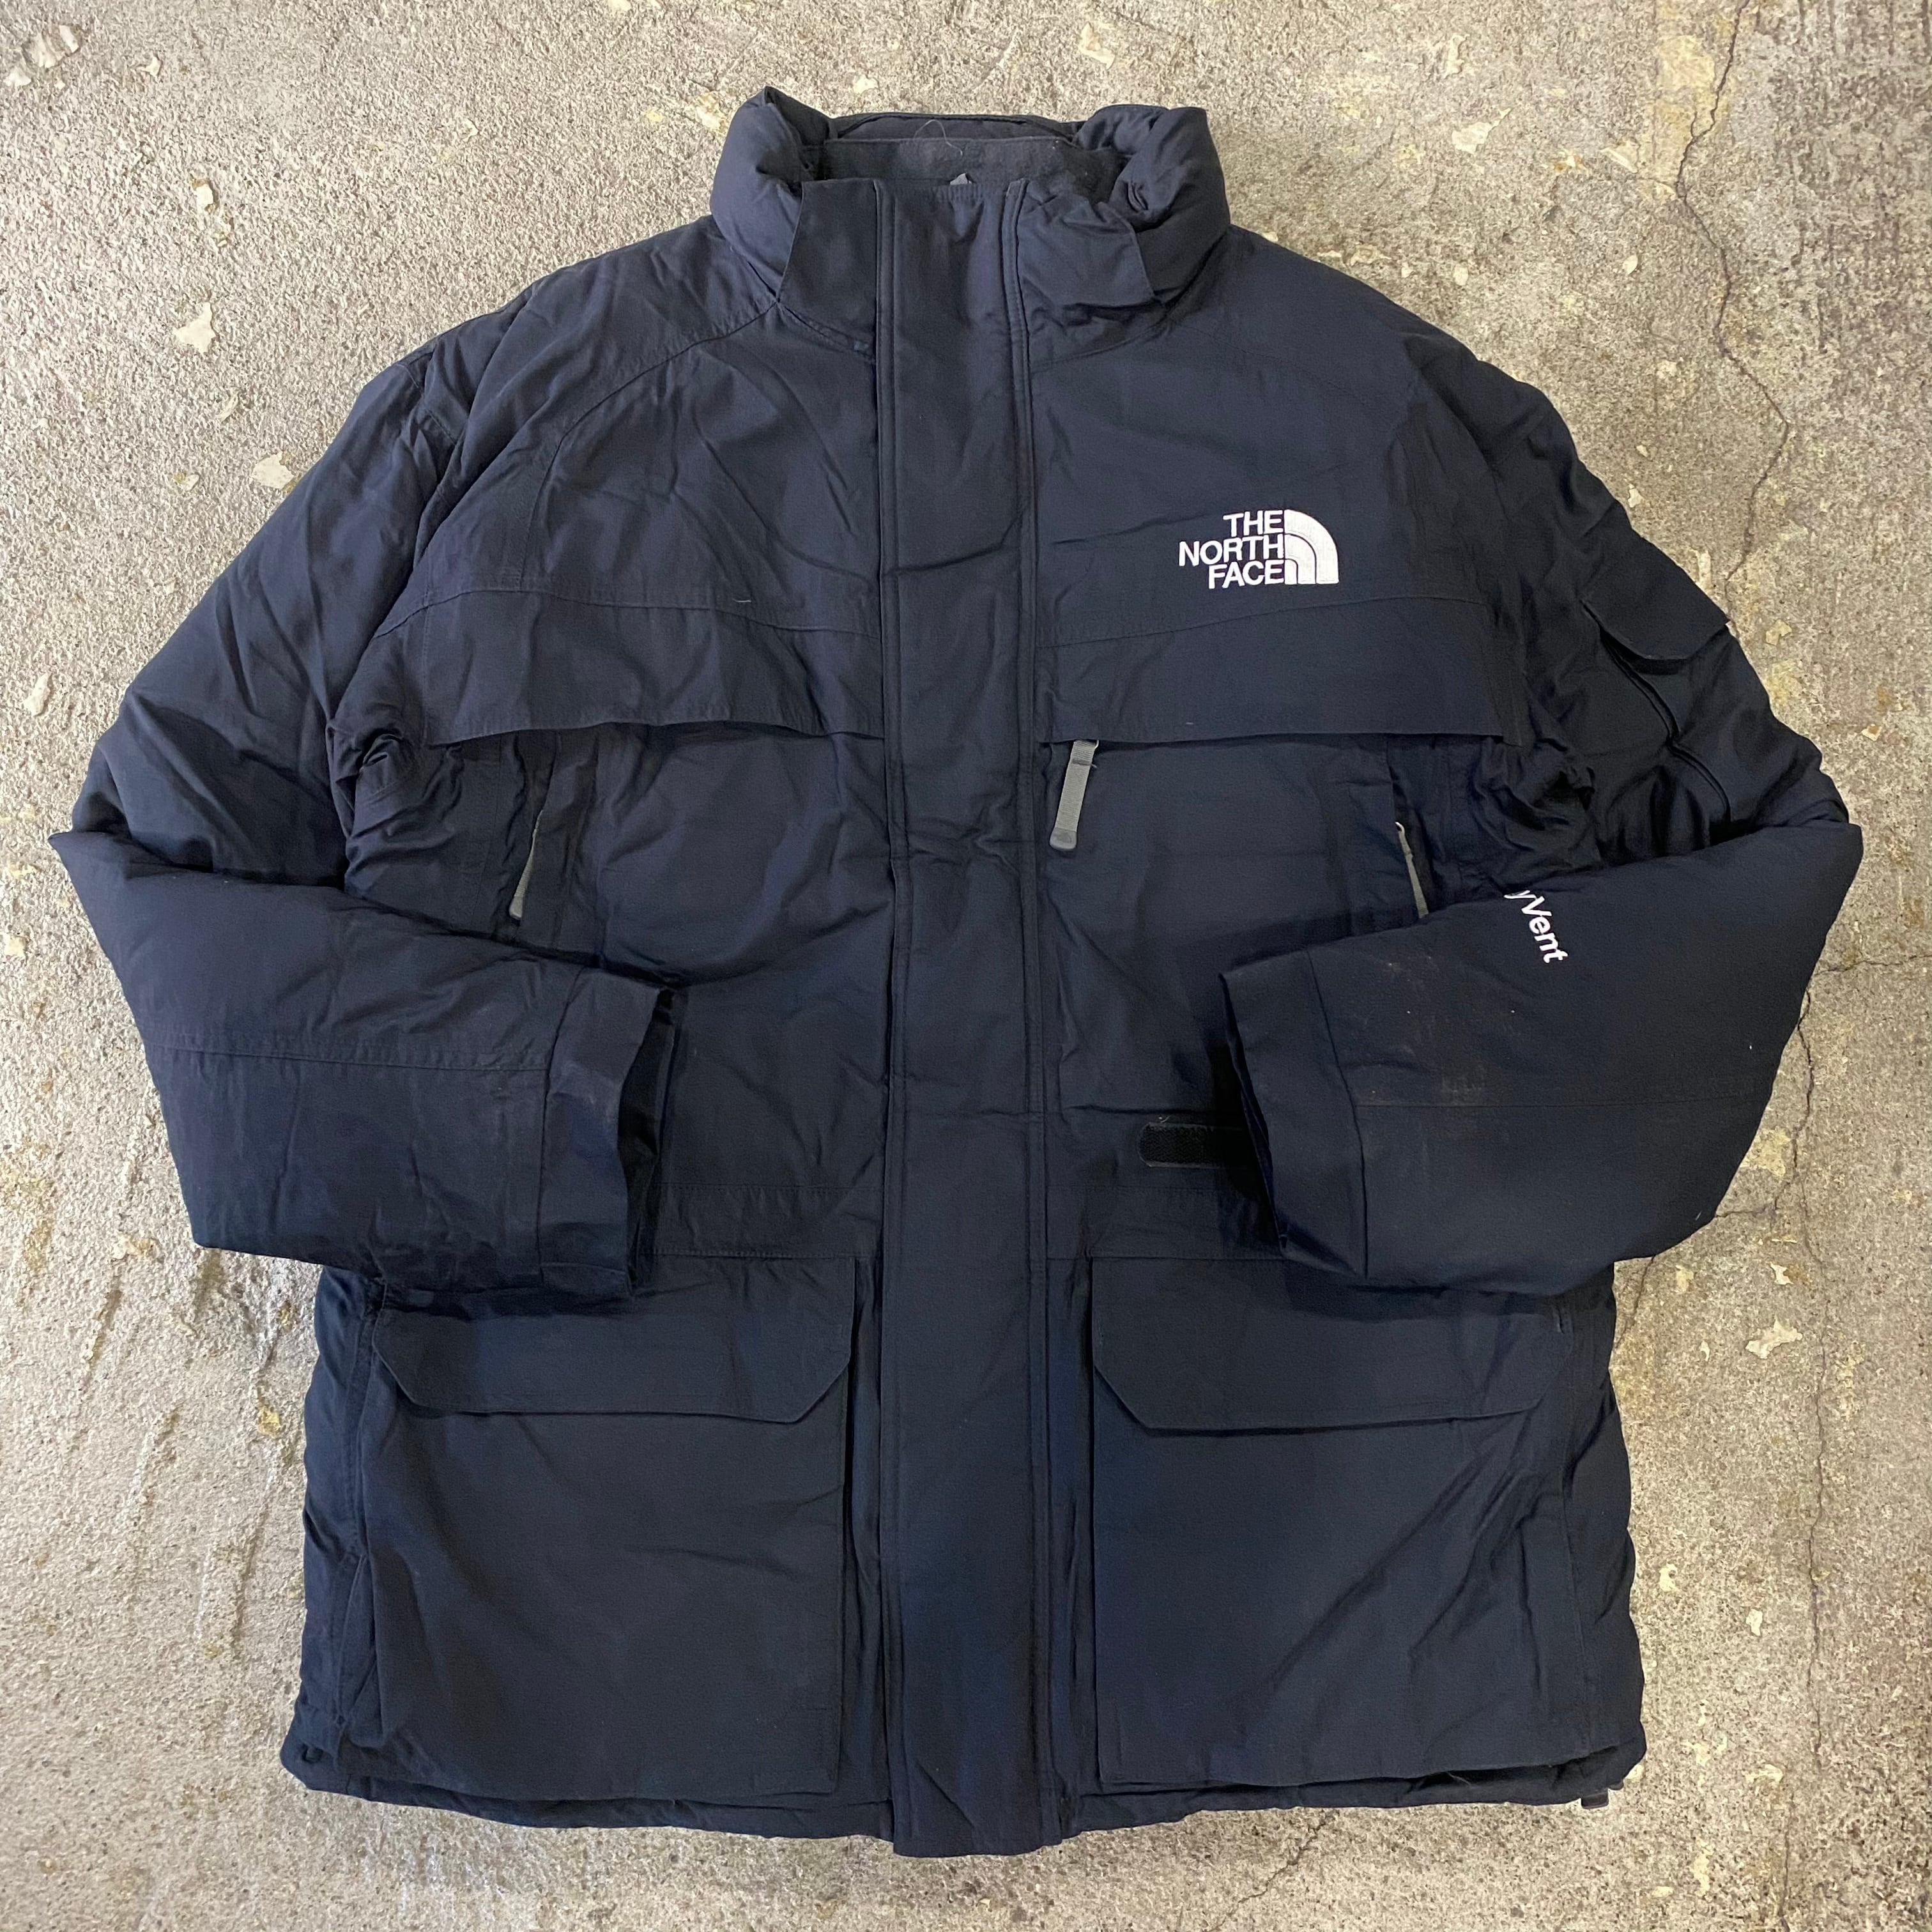 THE NORTH FACE HyVent Mountain Jacket